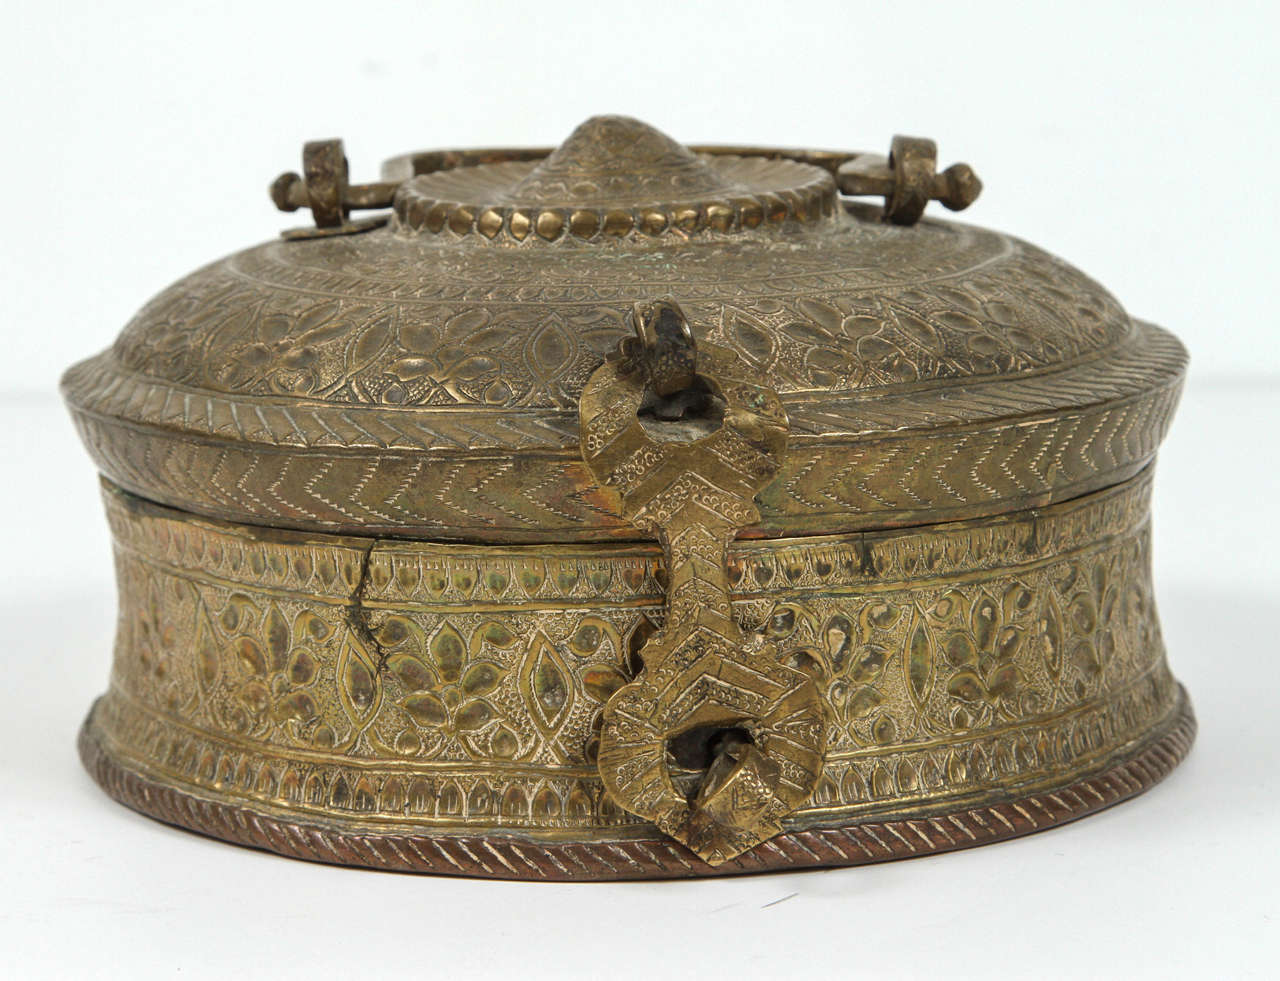 Asian Beaten Brass Betel Nut Pandan Box, Northern India.
Beautiful antique hand hammered Asian round brass betel with a lid and delicate engravings with  floral design handle hand crafted by skilled artisans from Northern India.
Indian Beaten Copper